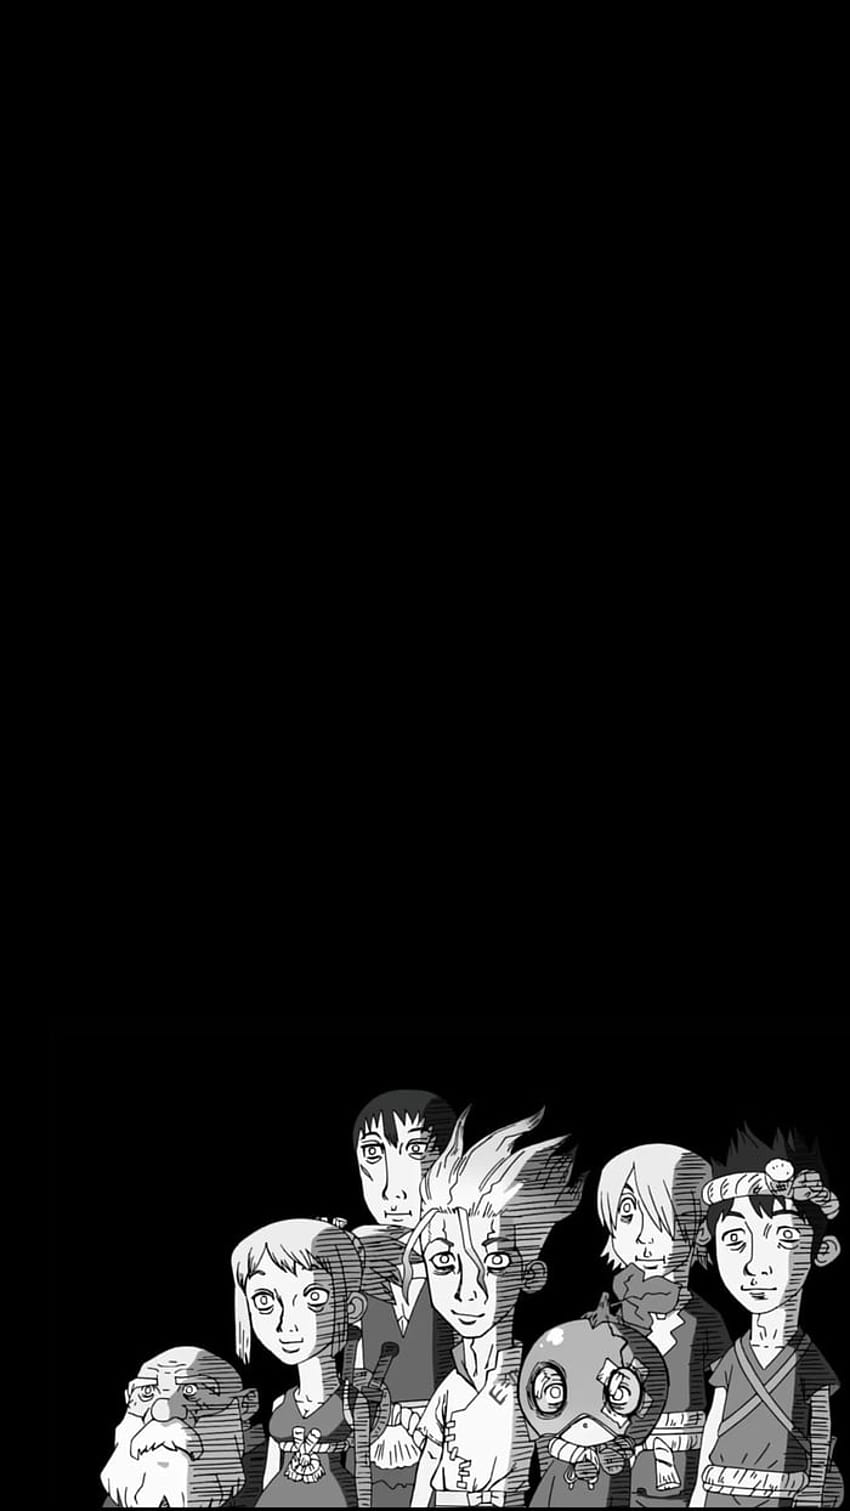 Made an Amoled Dr. Stone, anime amoled movie HD phone wallpaper